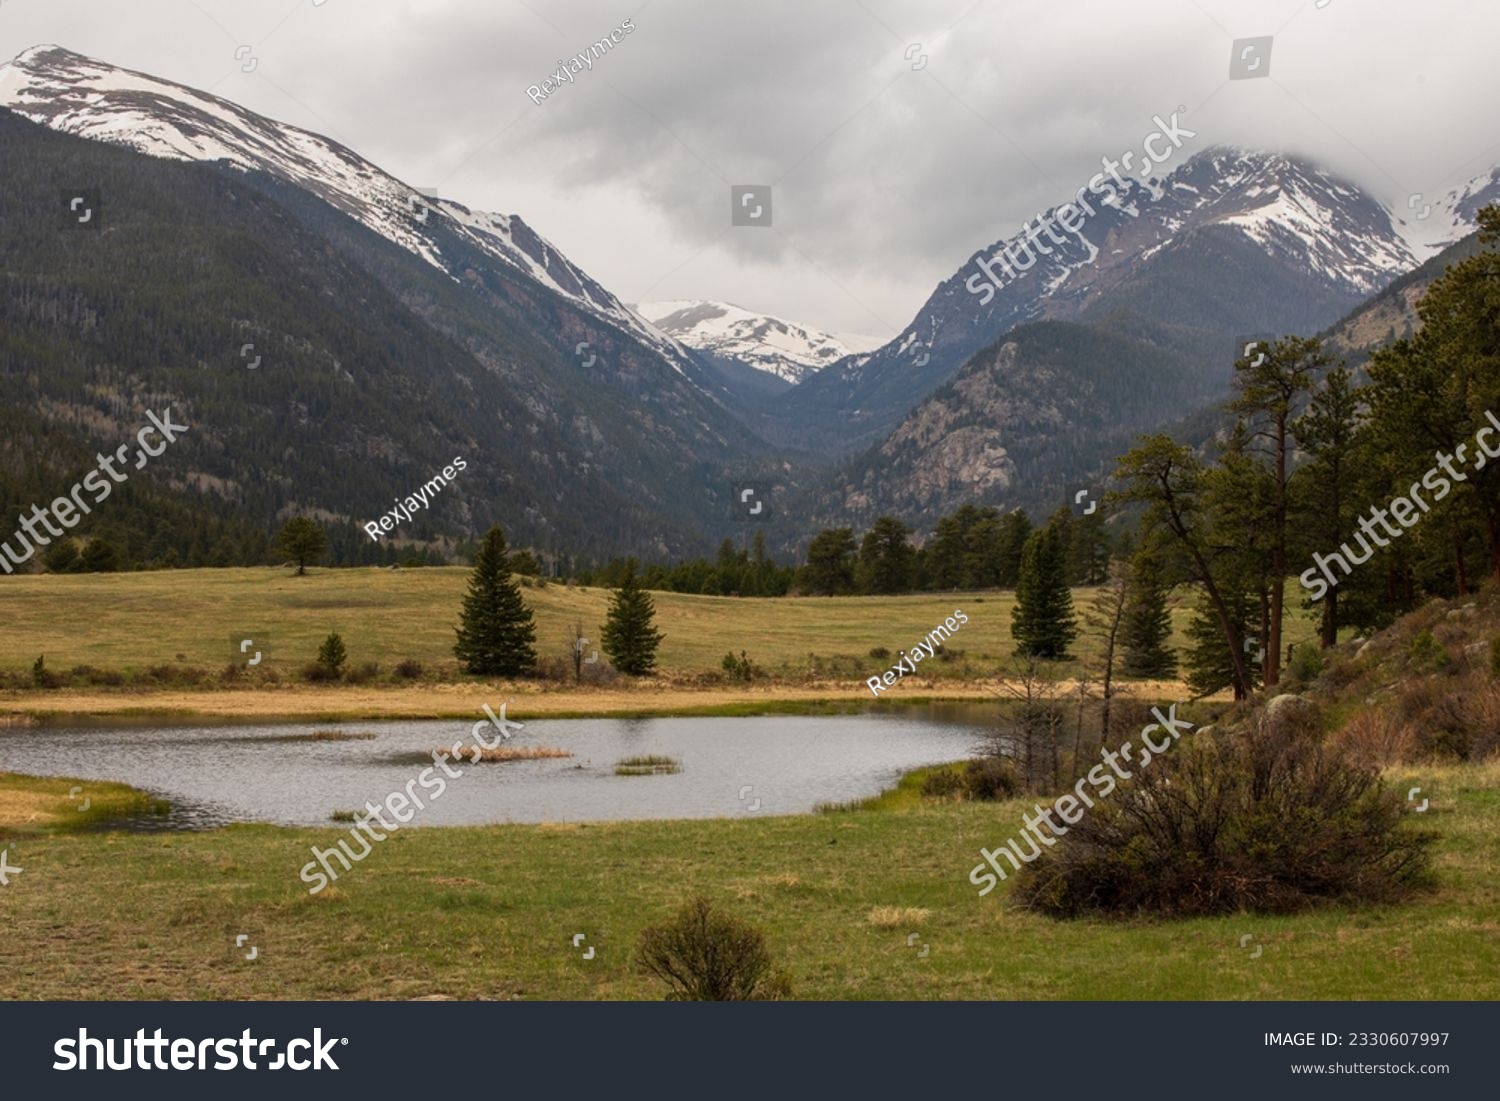 Green nature setting with a pond in foreground and a pale, cloudy sky.  Rocky Mountain pond with reflective water, green grass and dark mountains.  Colorado high country with cloudy sky. #2330607997